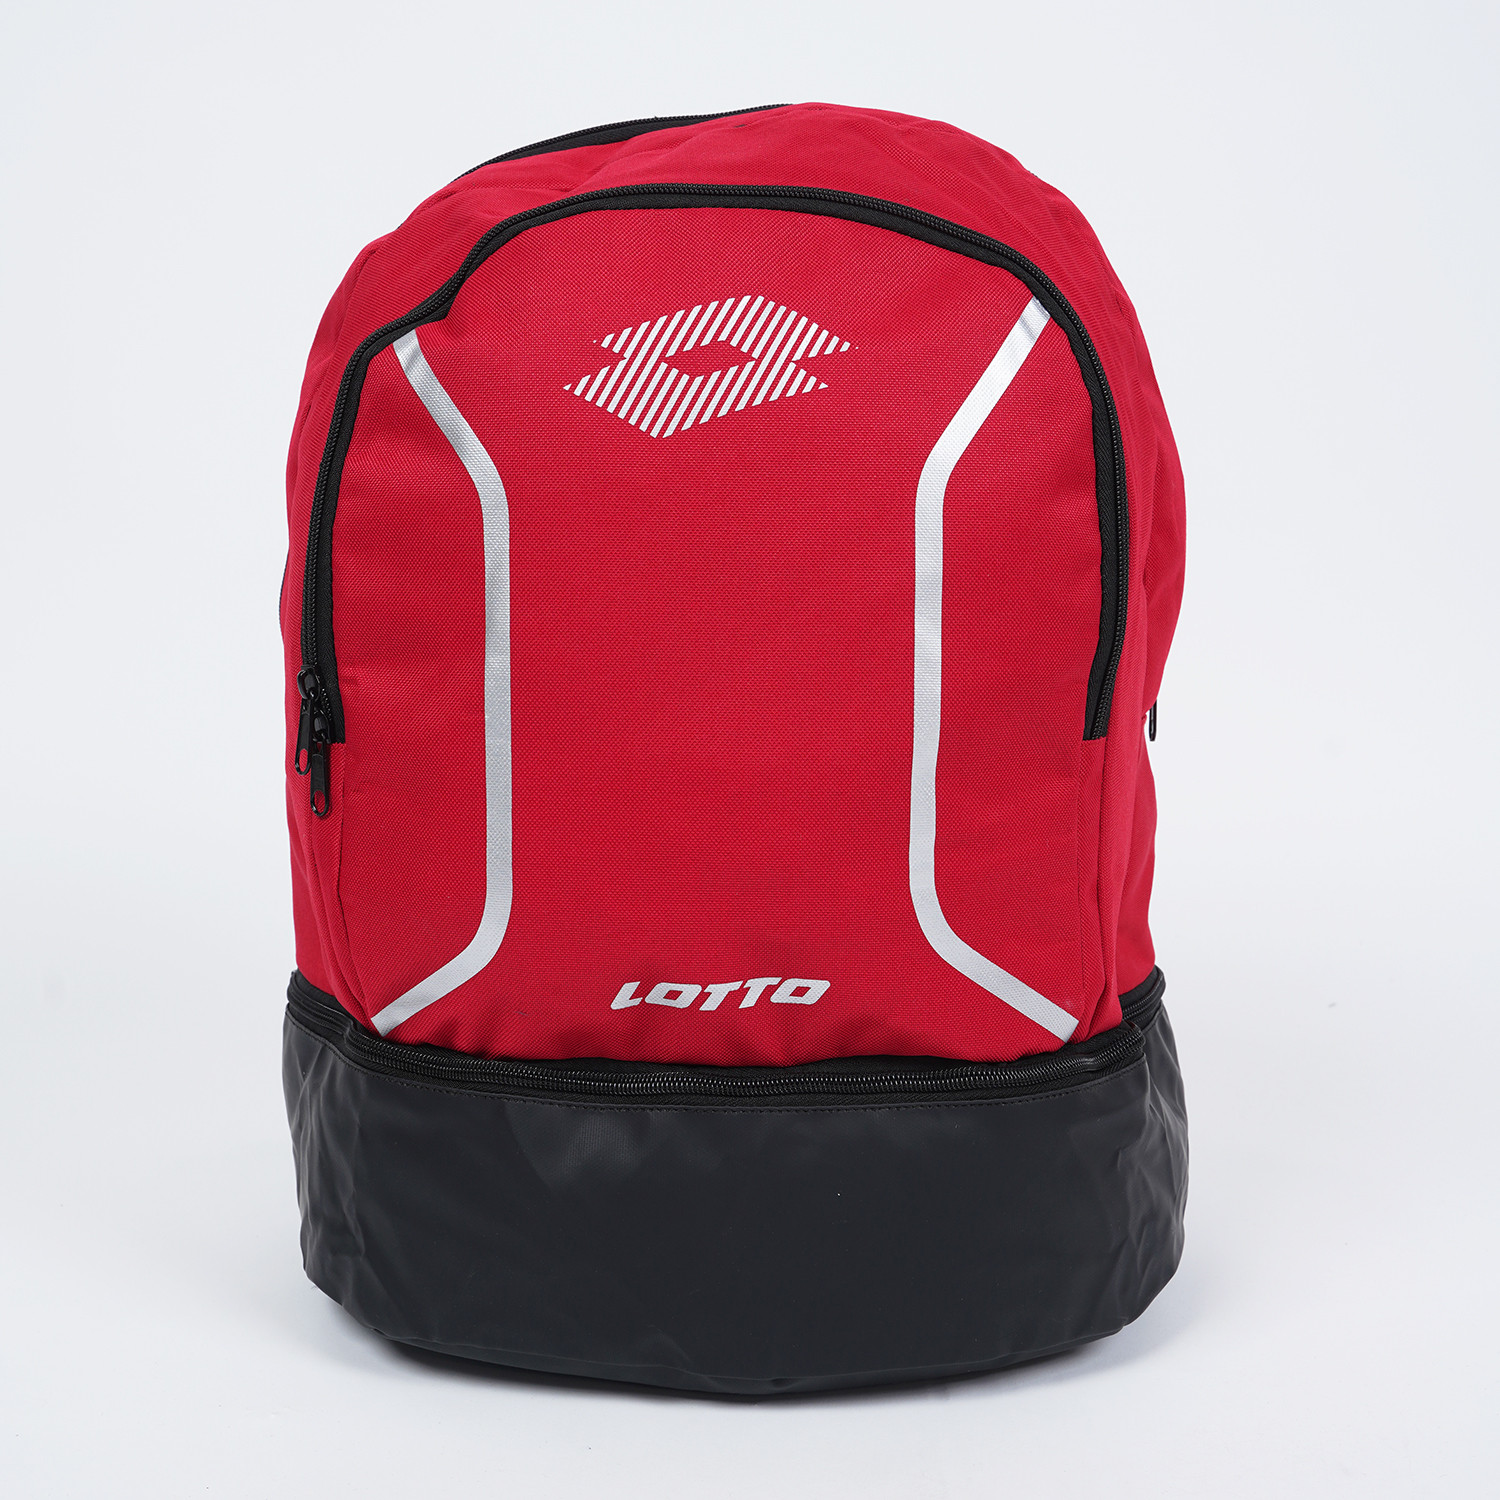 Lotto Backpack Soccer Omega Iii | Large 29 L (9000040280_41909)